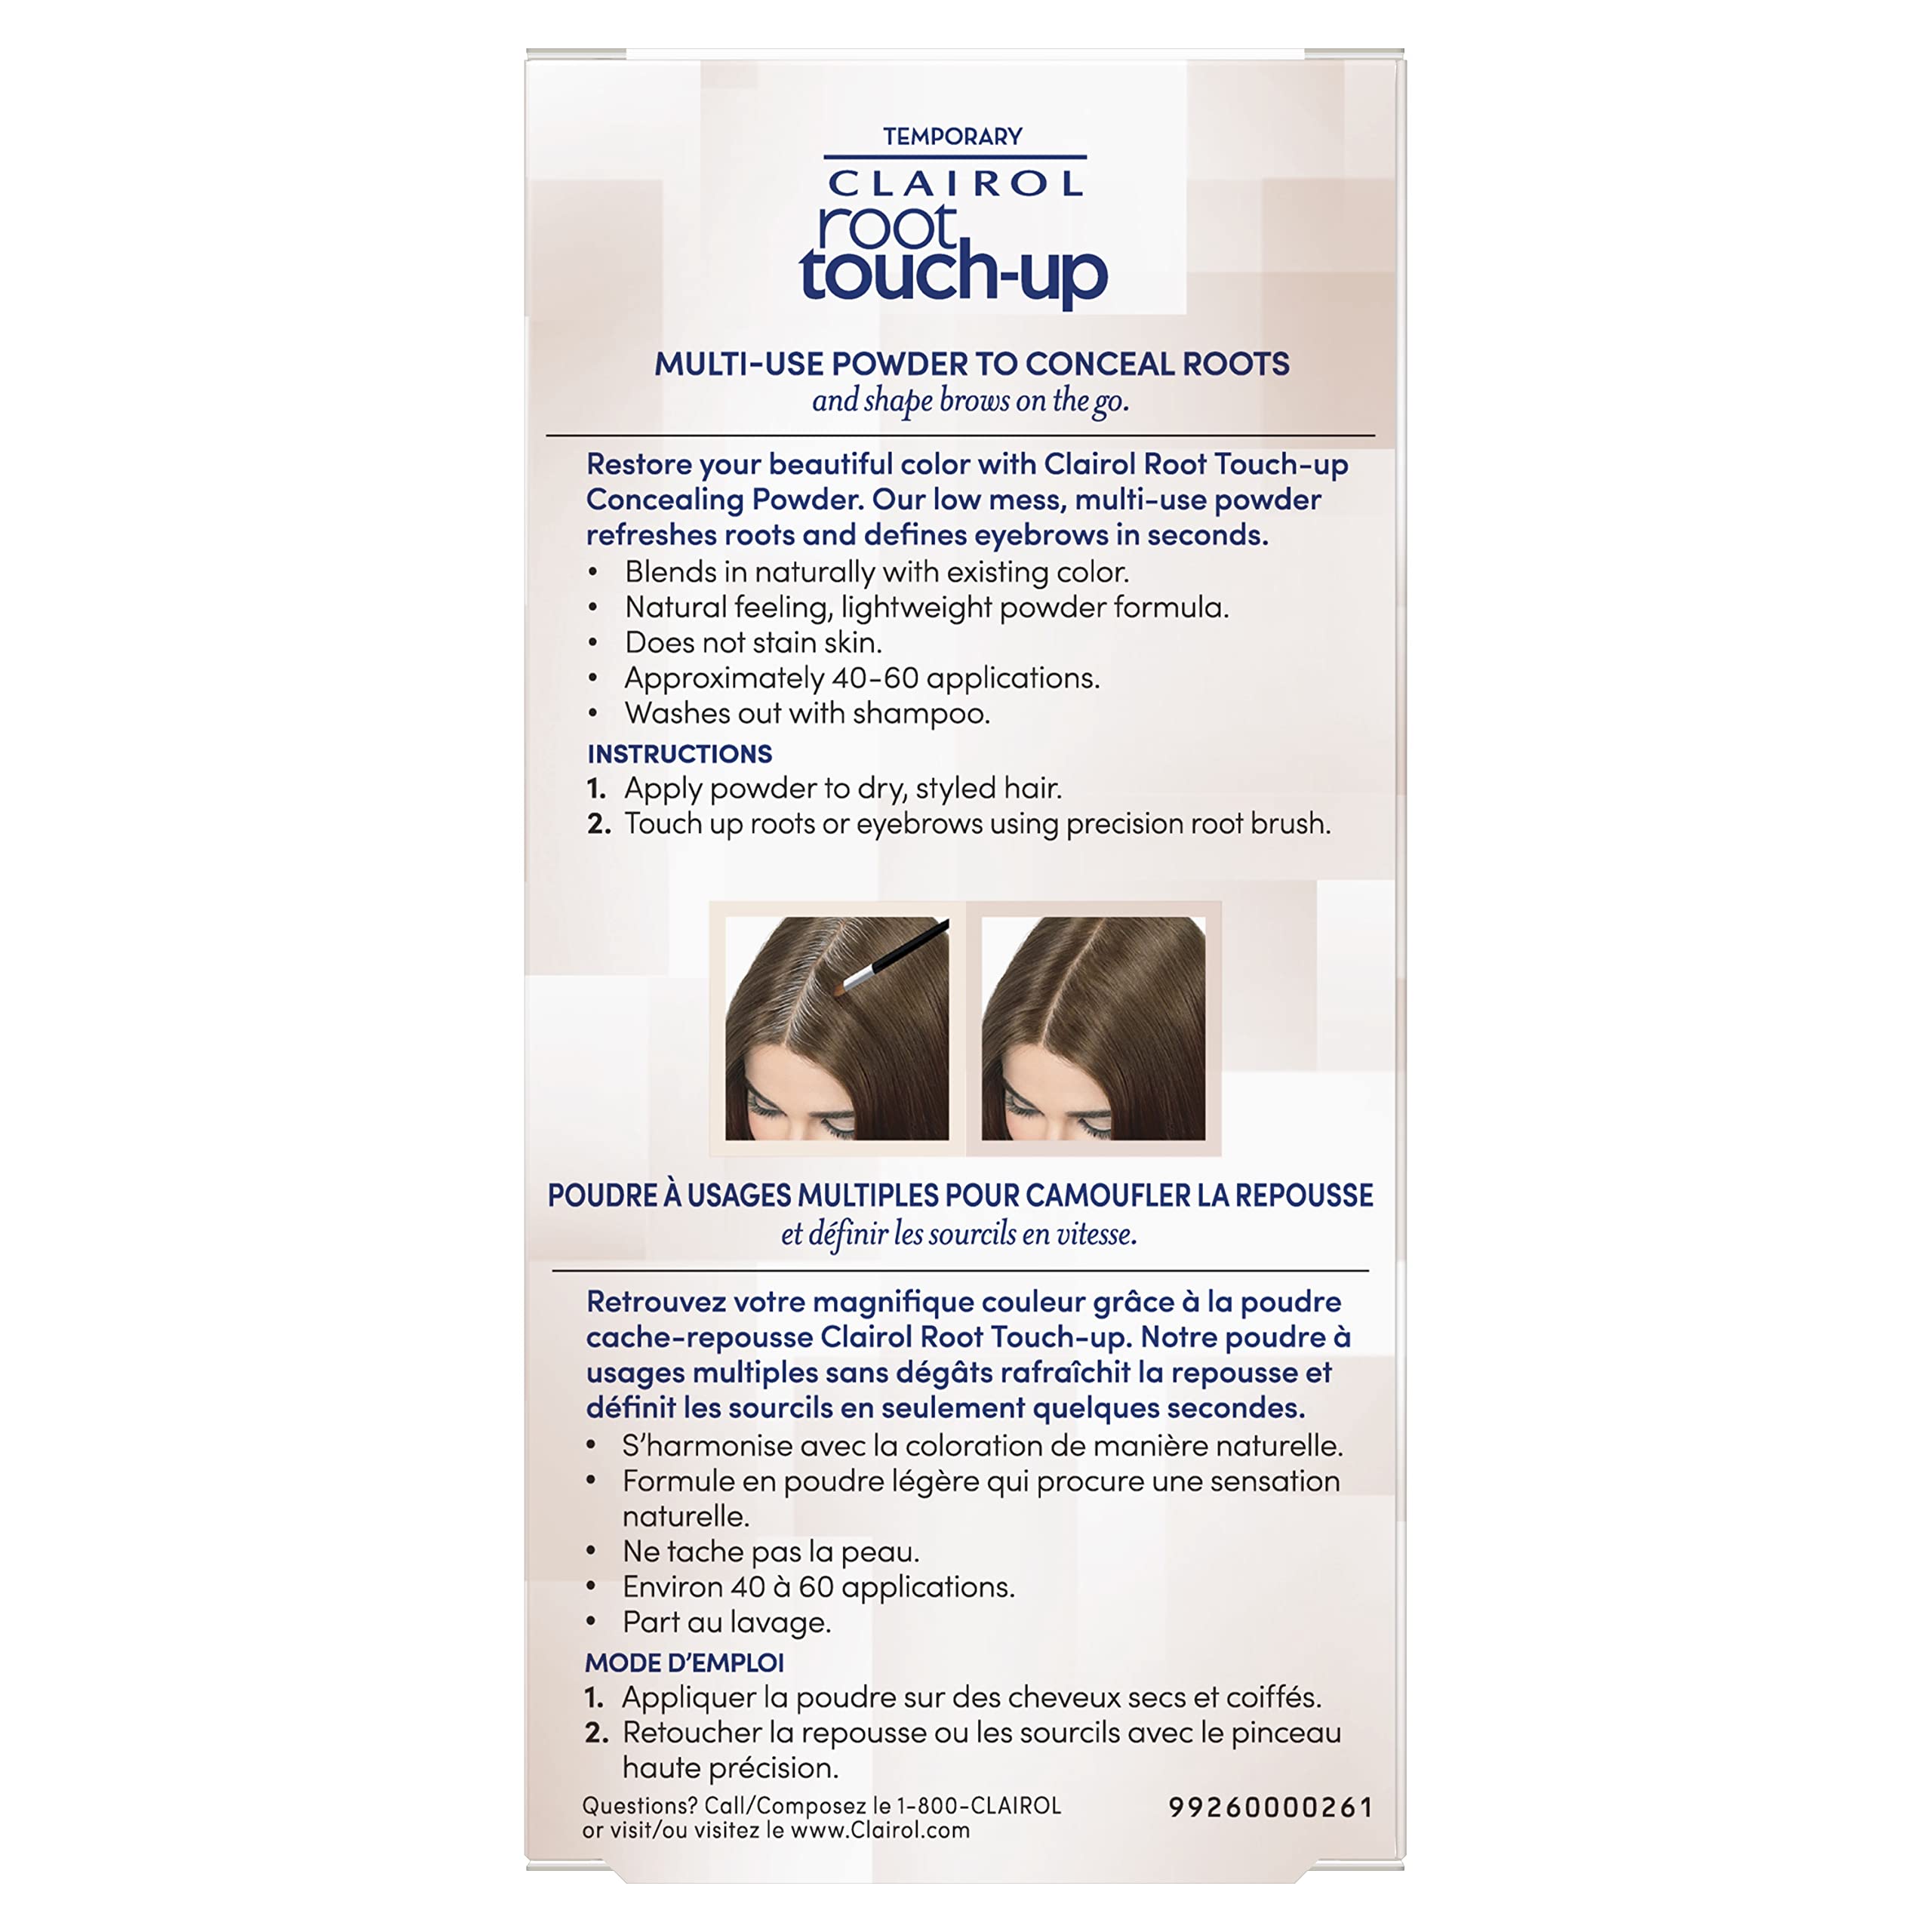 Clairol Root Touch-Up Temporary Concealing Powder, Medium Brown Hair Color, Pack of 1